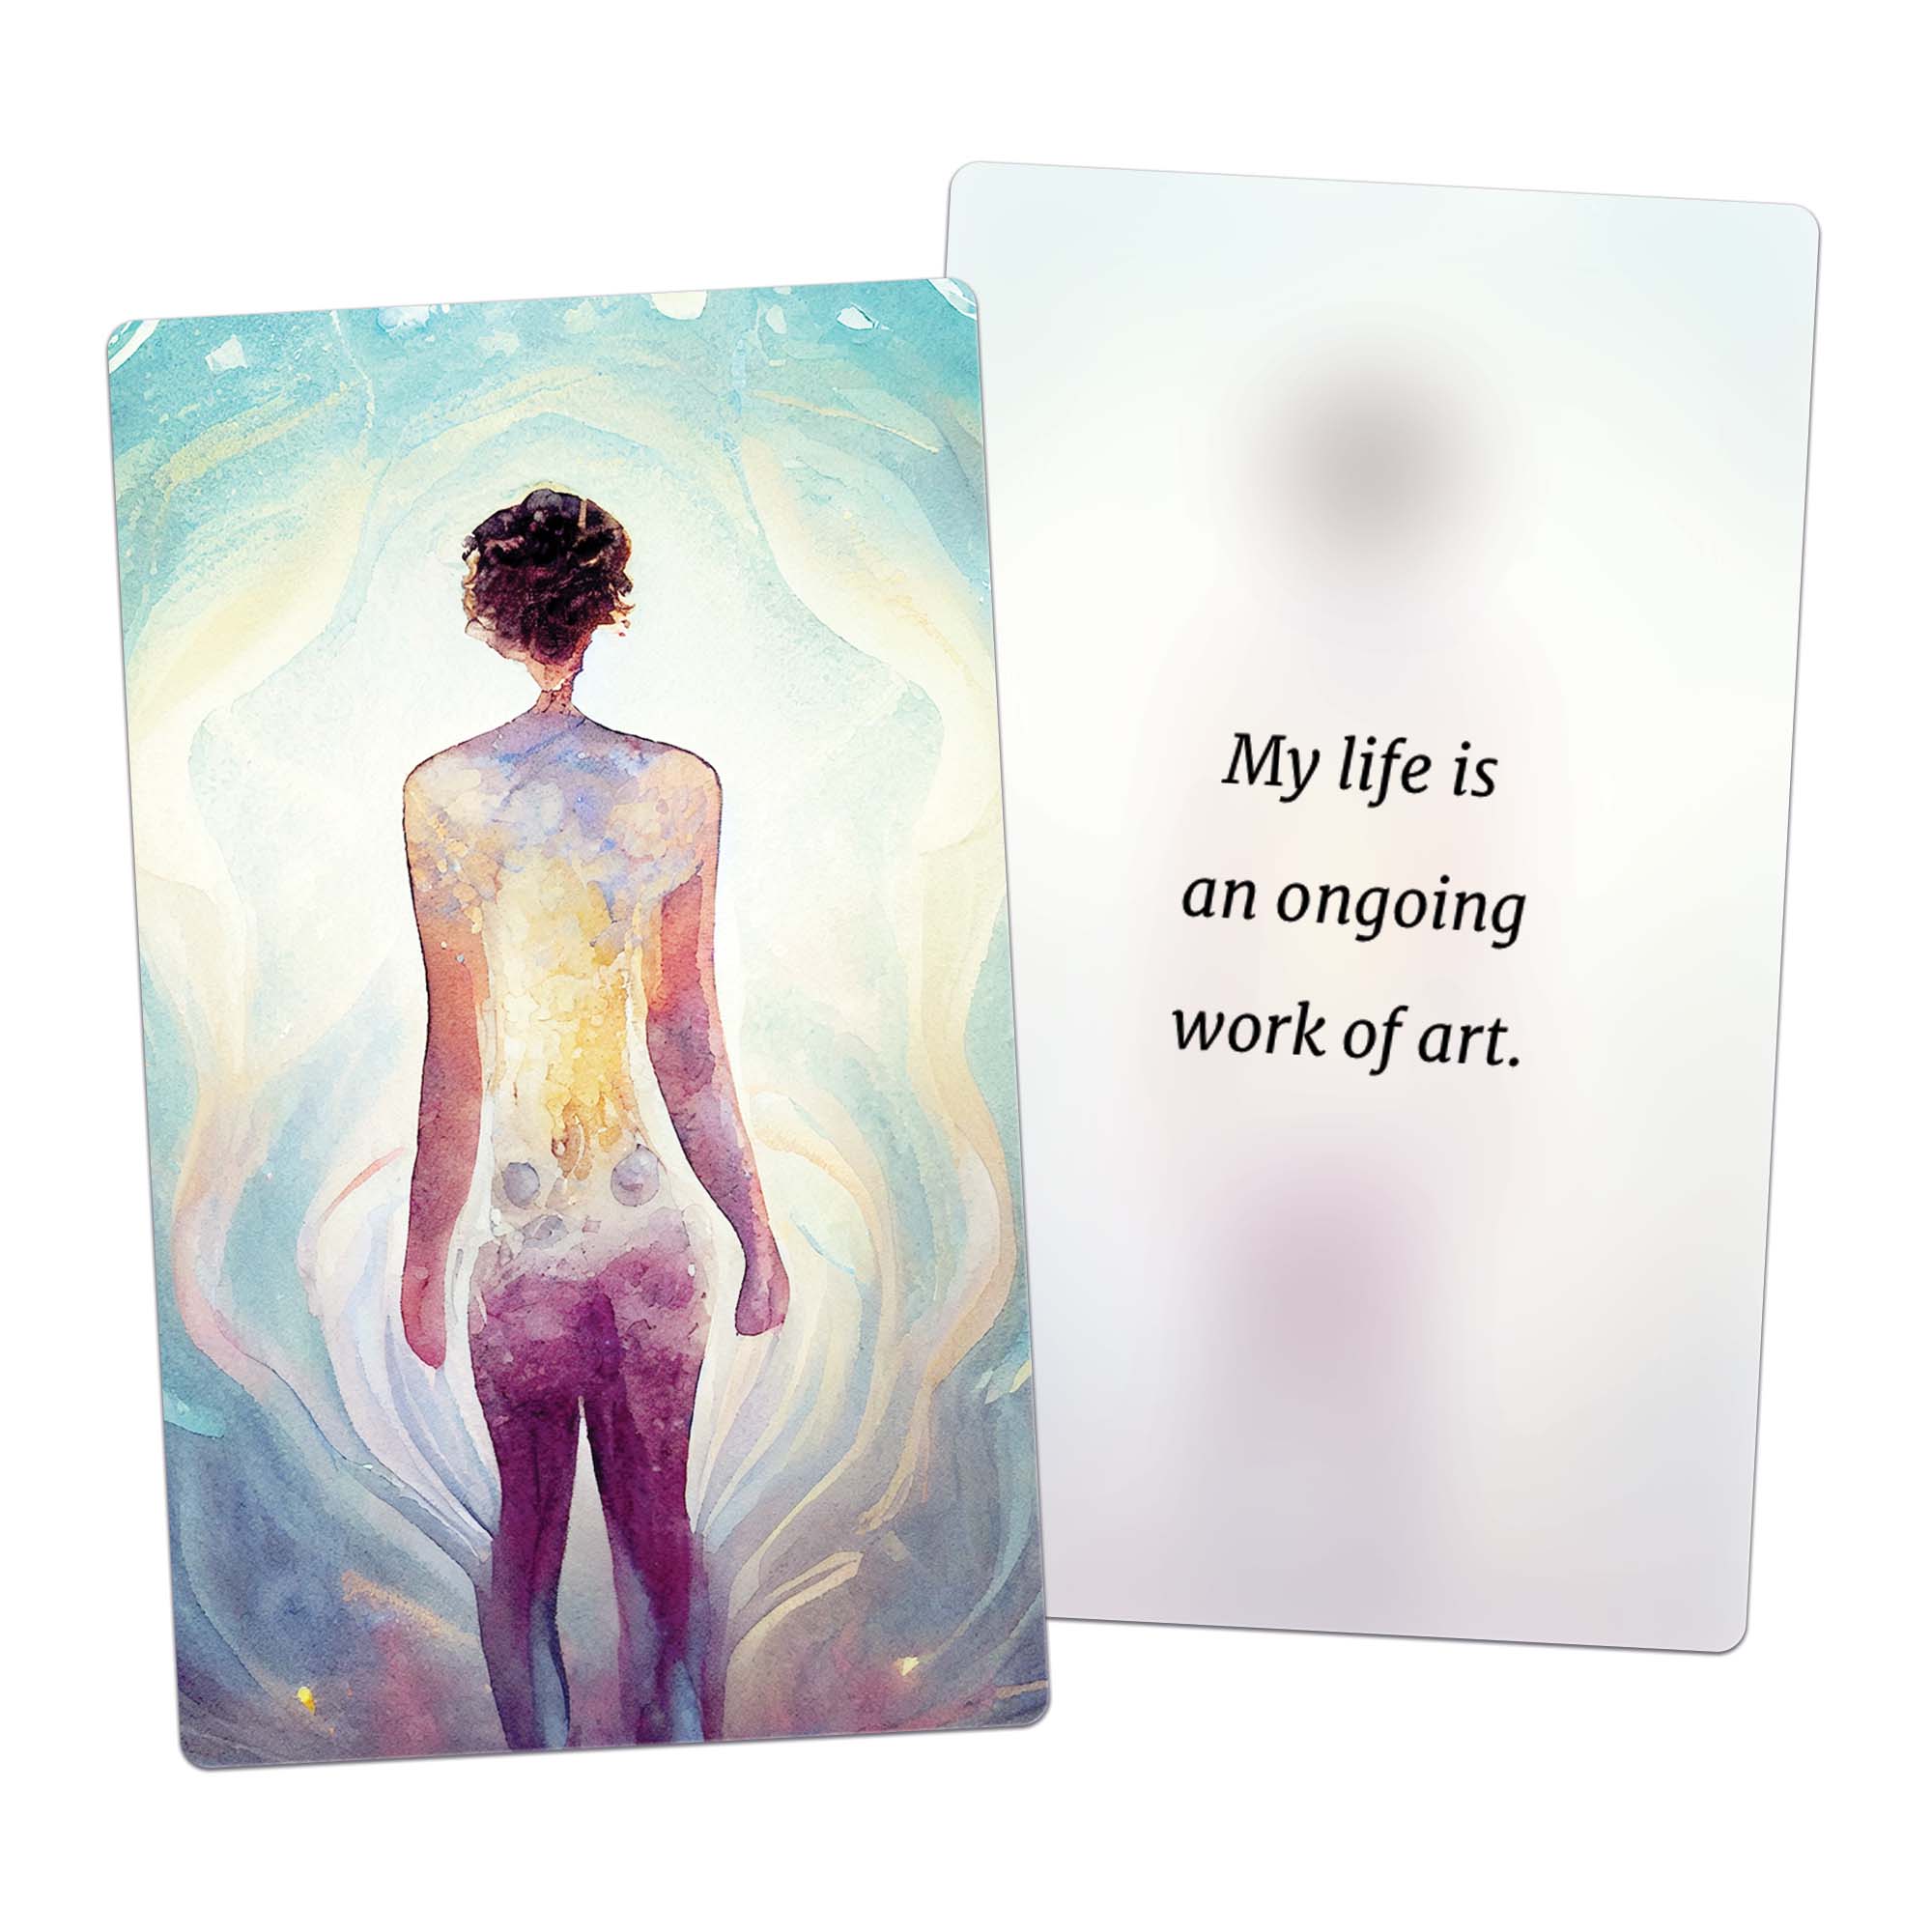 AFFIRMATION CARD - My life is an ongoing work of art.